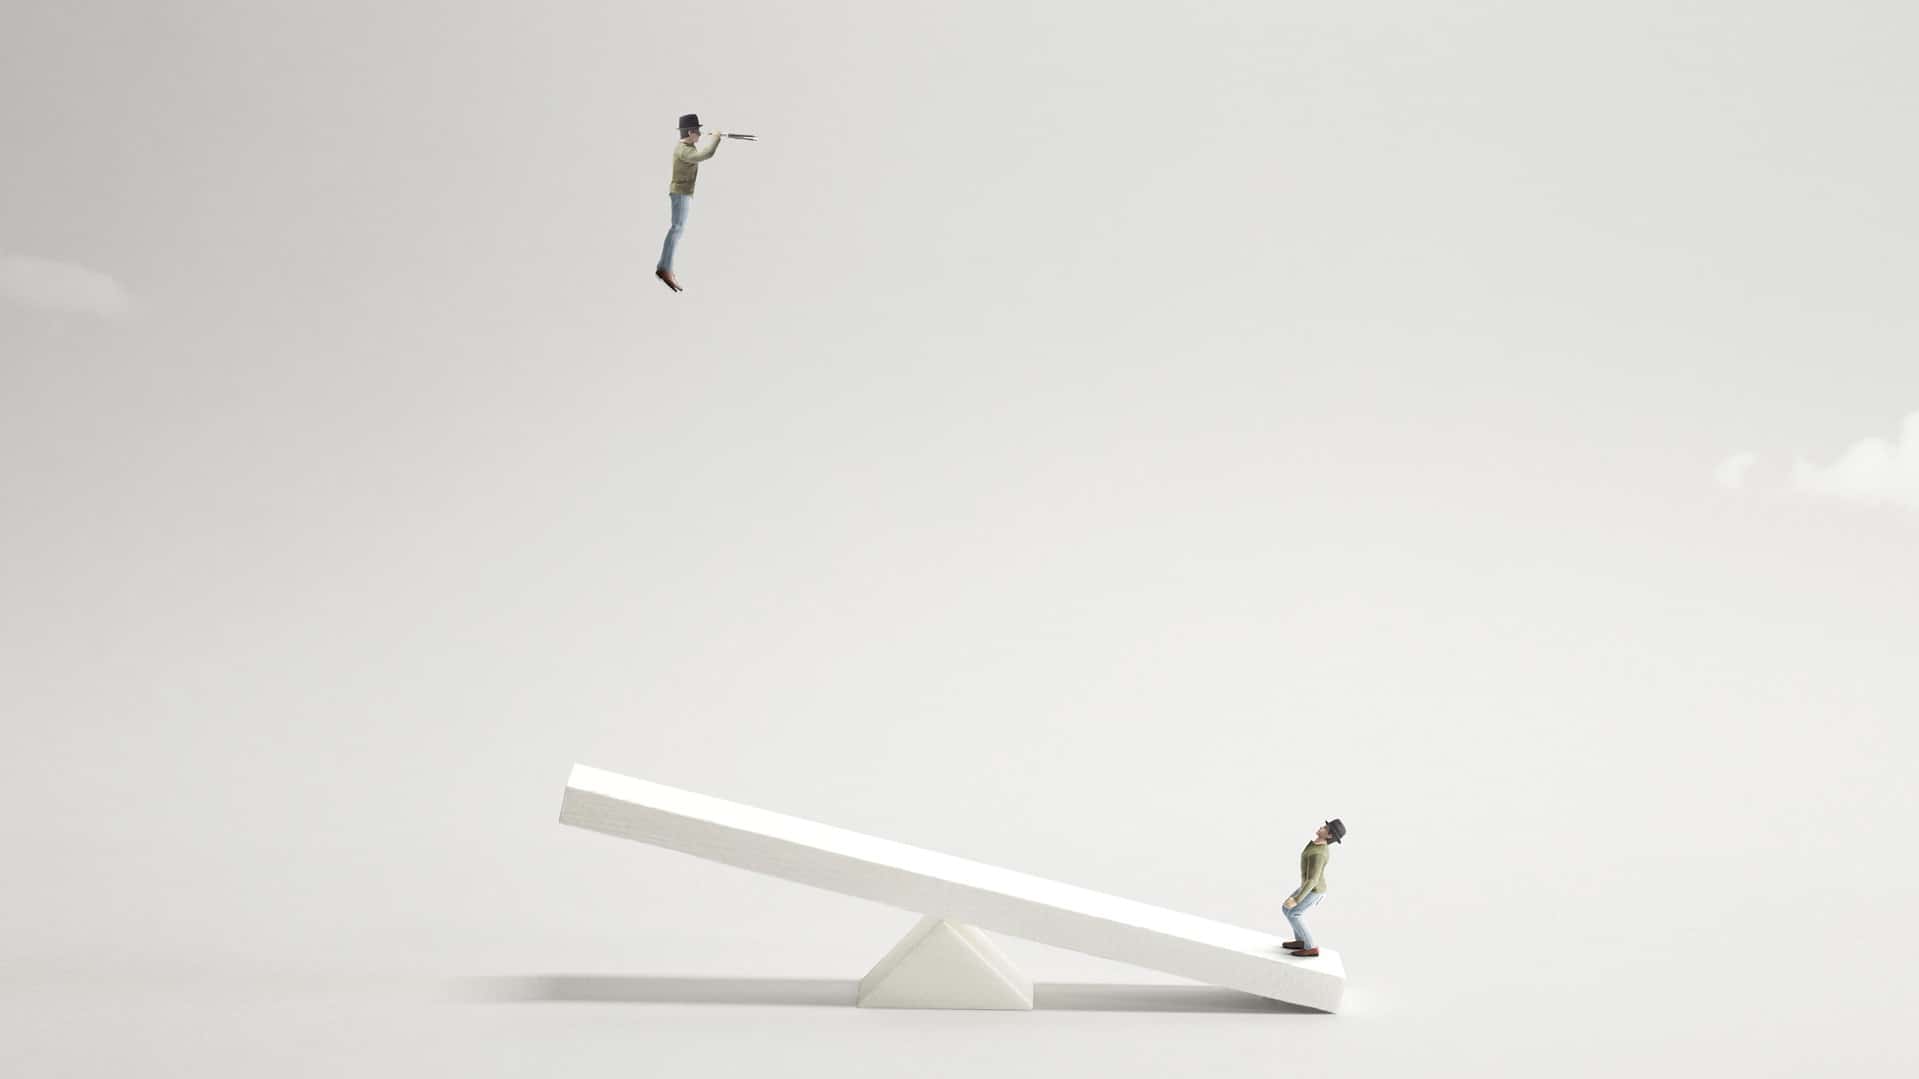 A person bounces another up high from a seesaw as the one in the air looks through a telescope into the future.